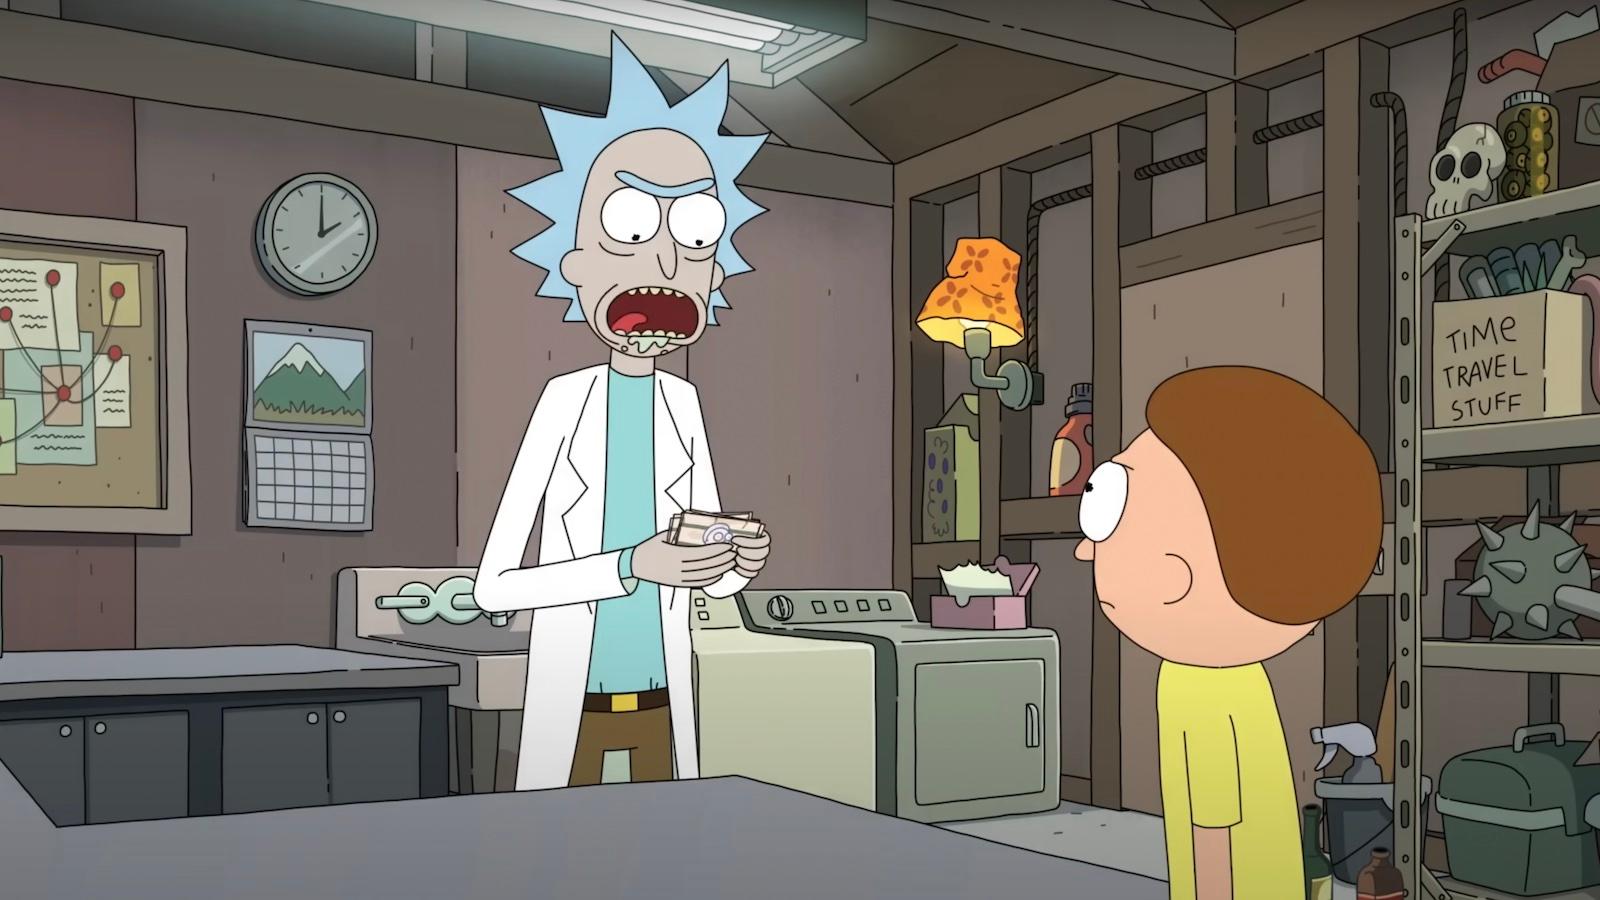 Watch Rick and Morty Season 4 Episode 6 Online